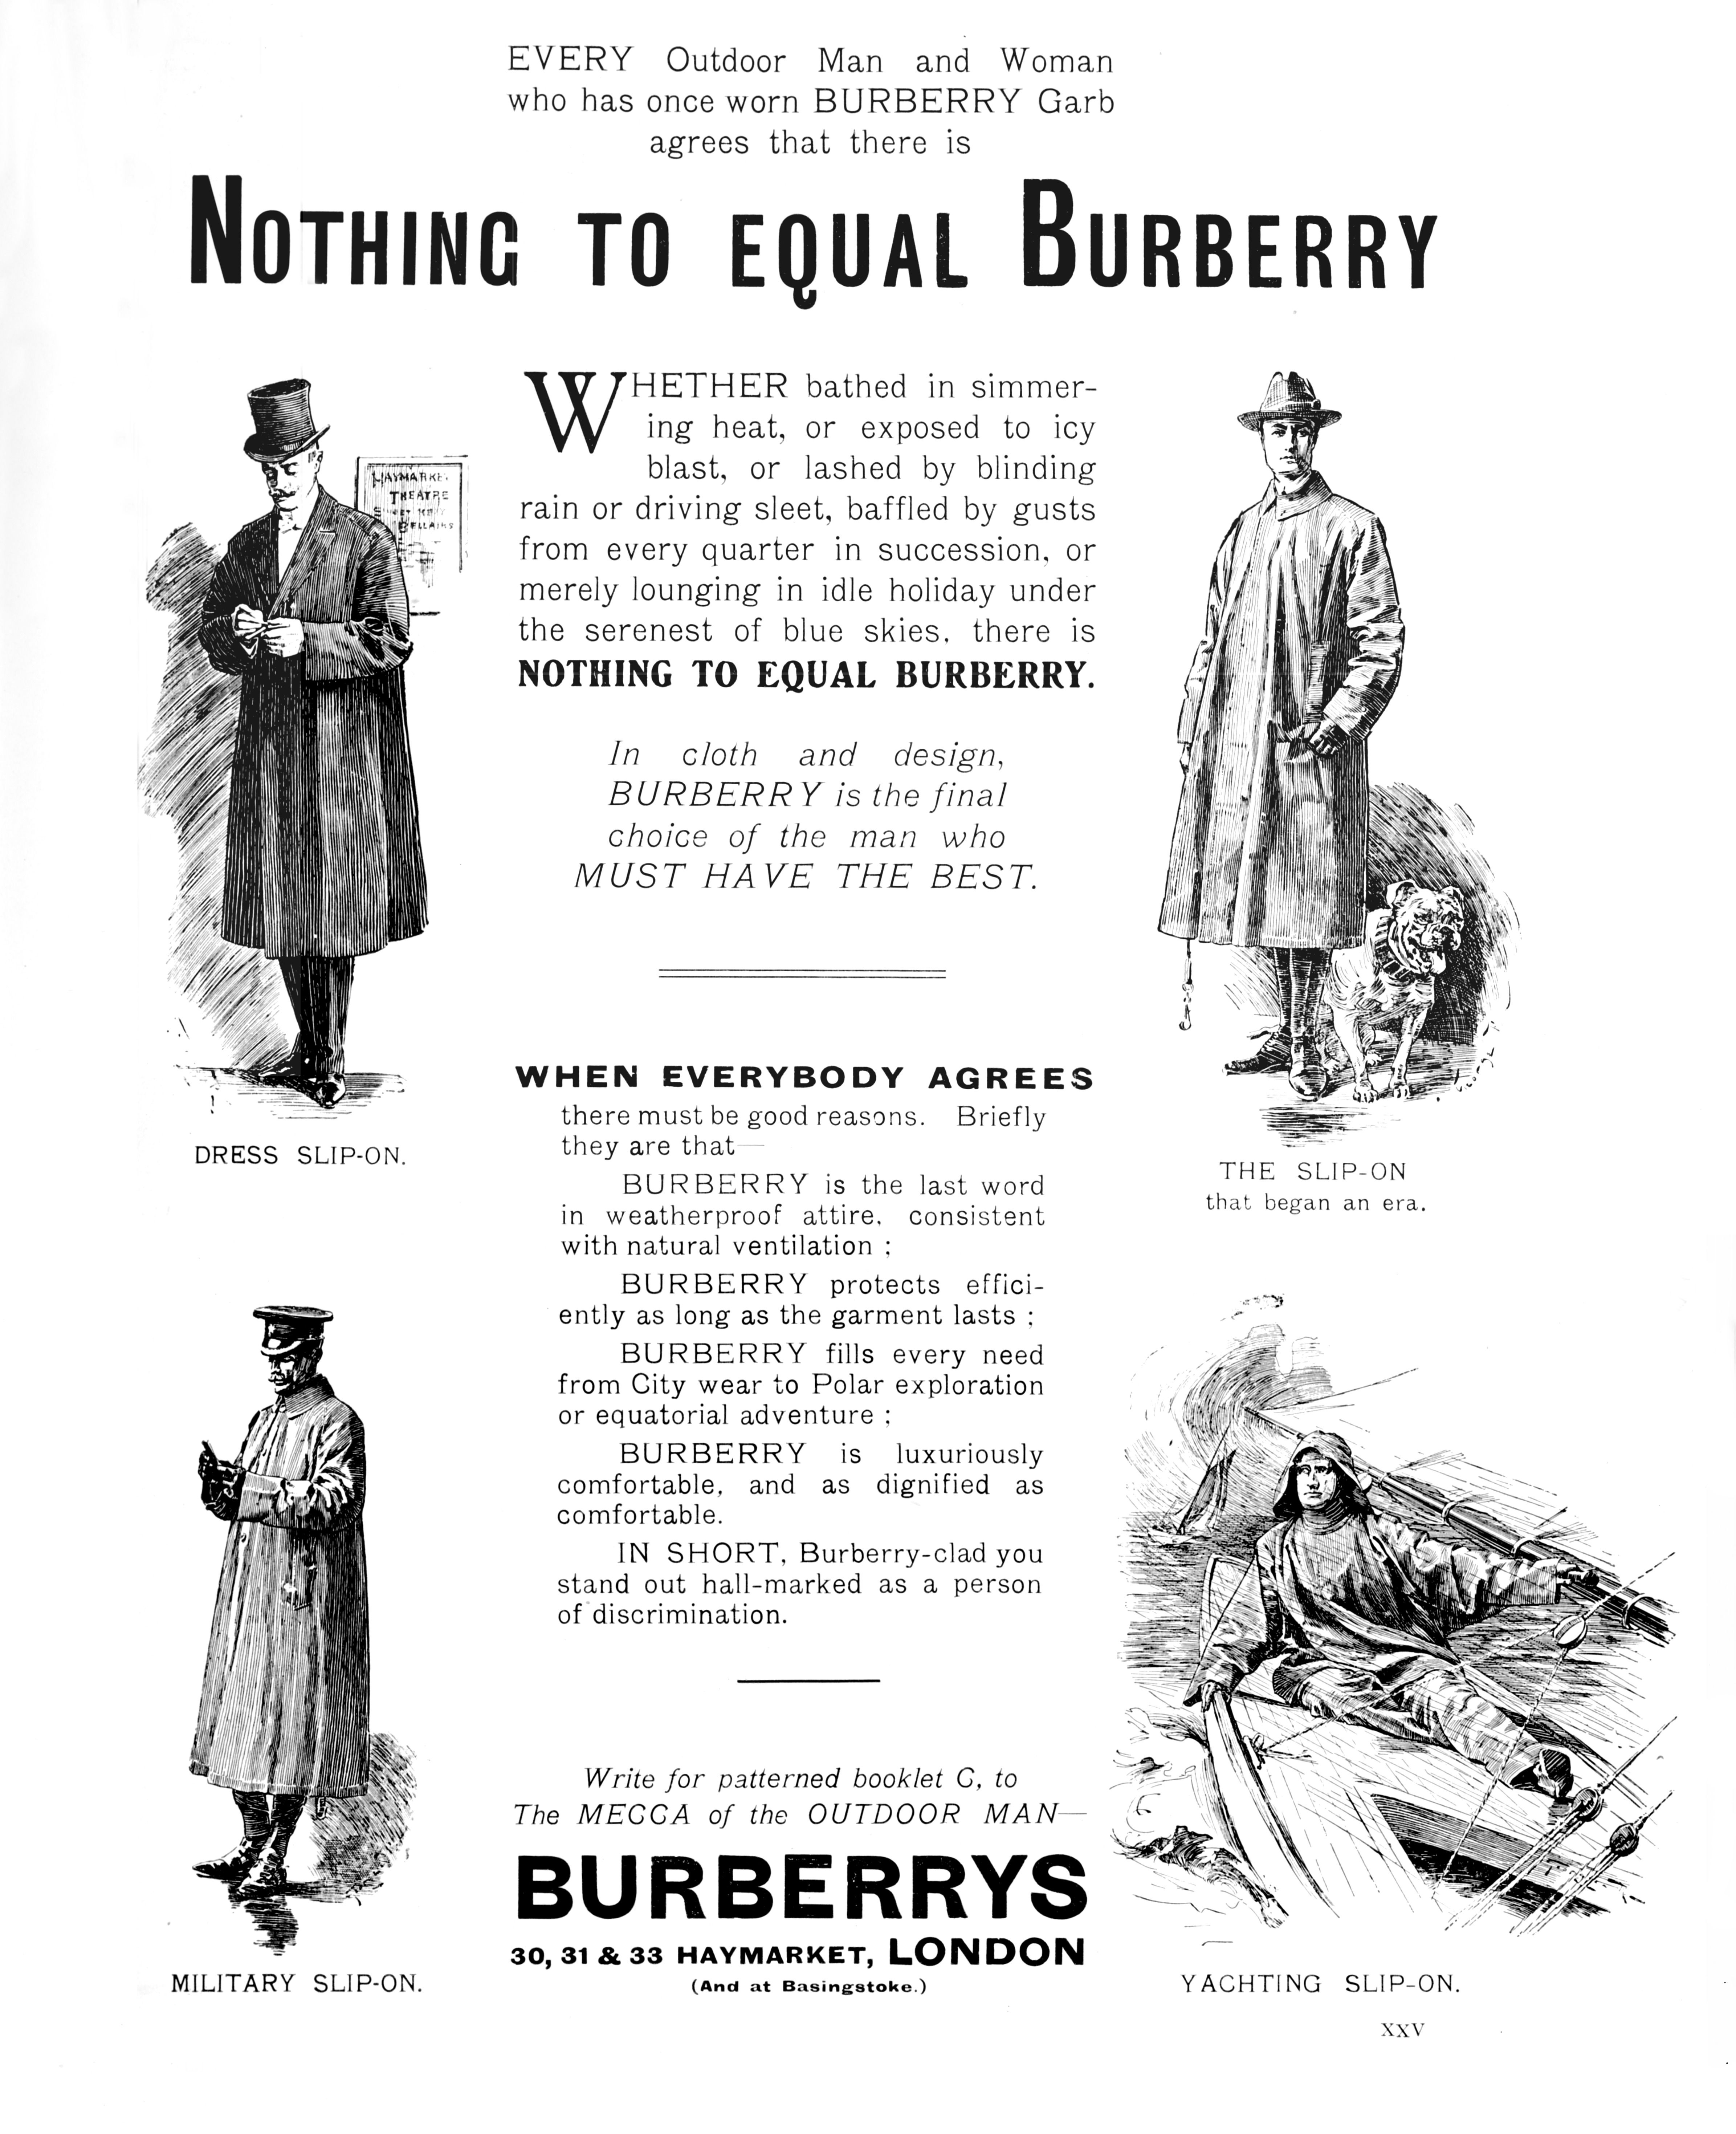 The Very British History of Burberry